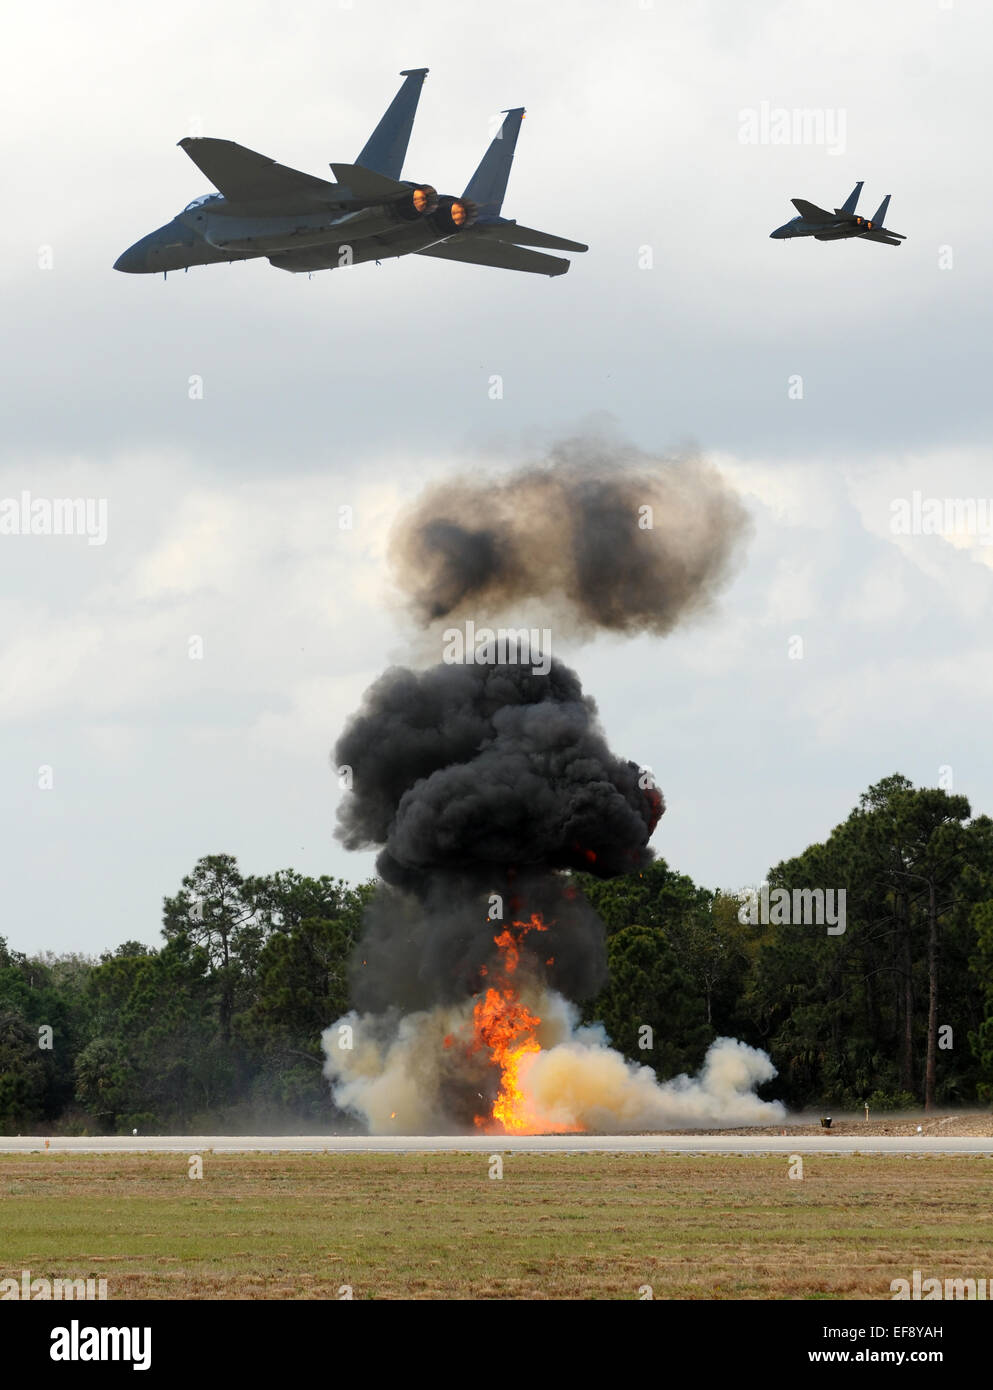 Aerial bombardment by modern jetfighters Stock Photo